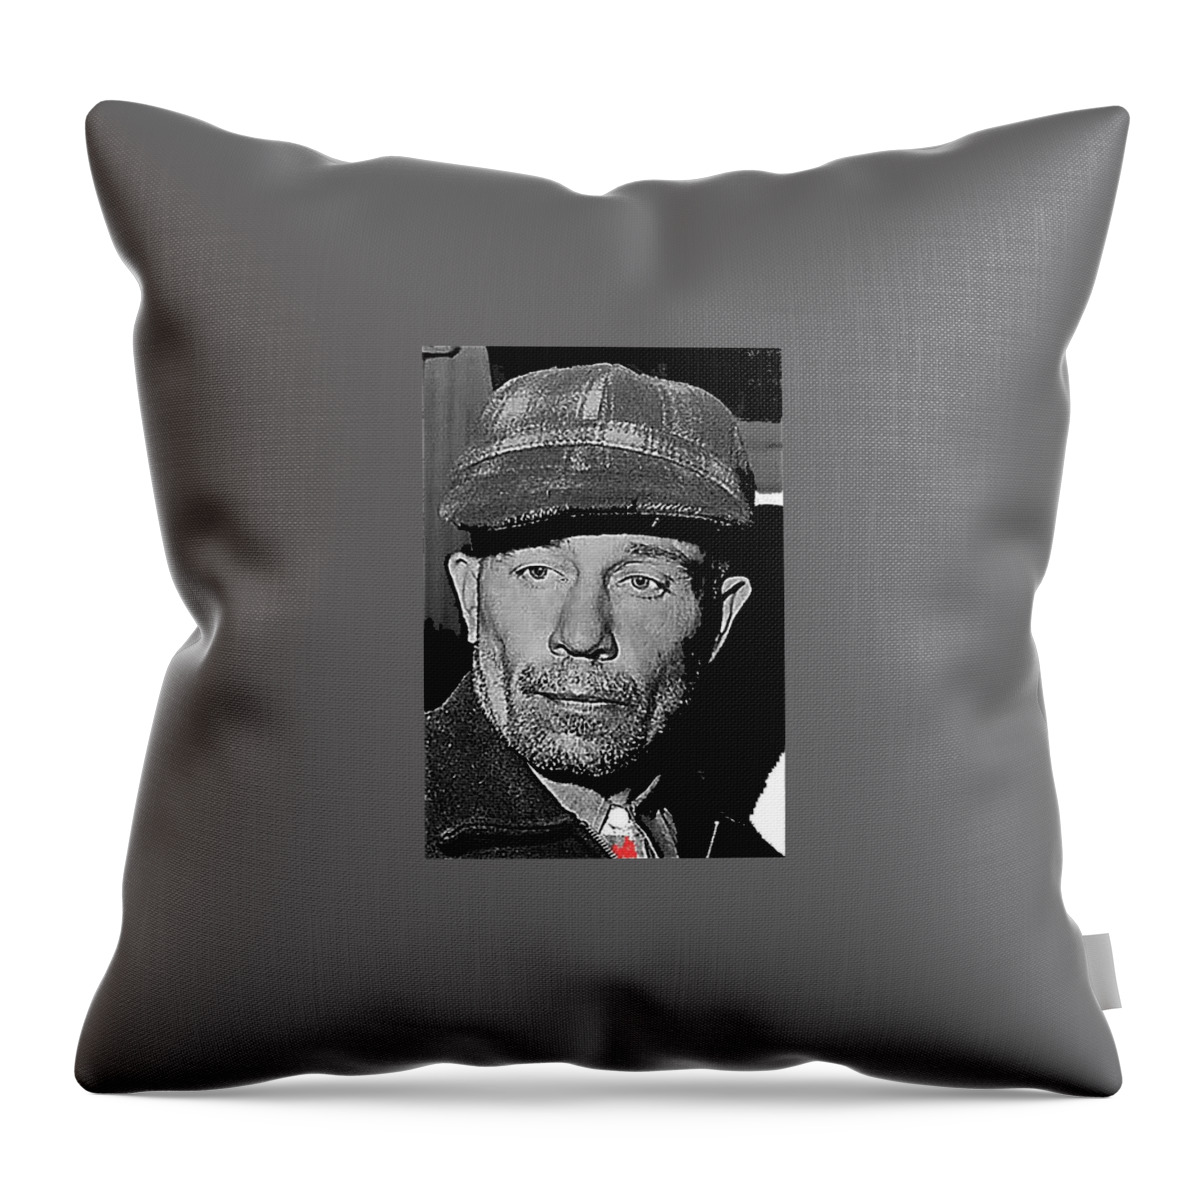 Ed Gein The Ghoul Who Inspired Psycho Plainfield Wisconsin C.1957 Throw Pillow featuring the photograph Ed Gein The Ghoul Who Inspired Psycho Plainfield Wisconsin C.1957-2013 #4 by David Lee Guss